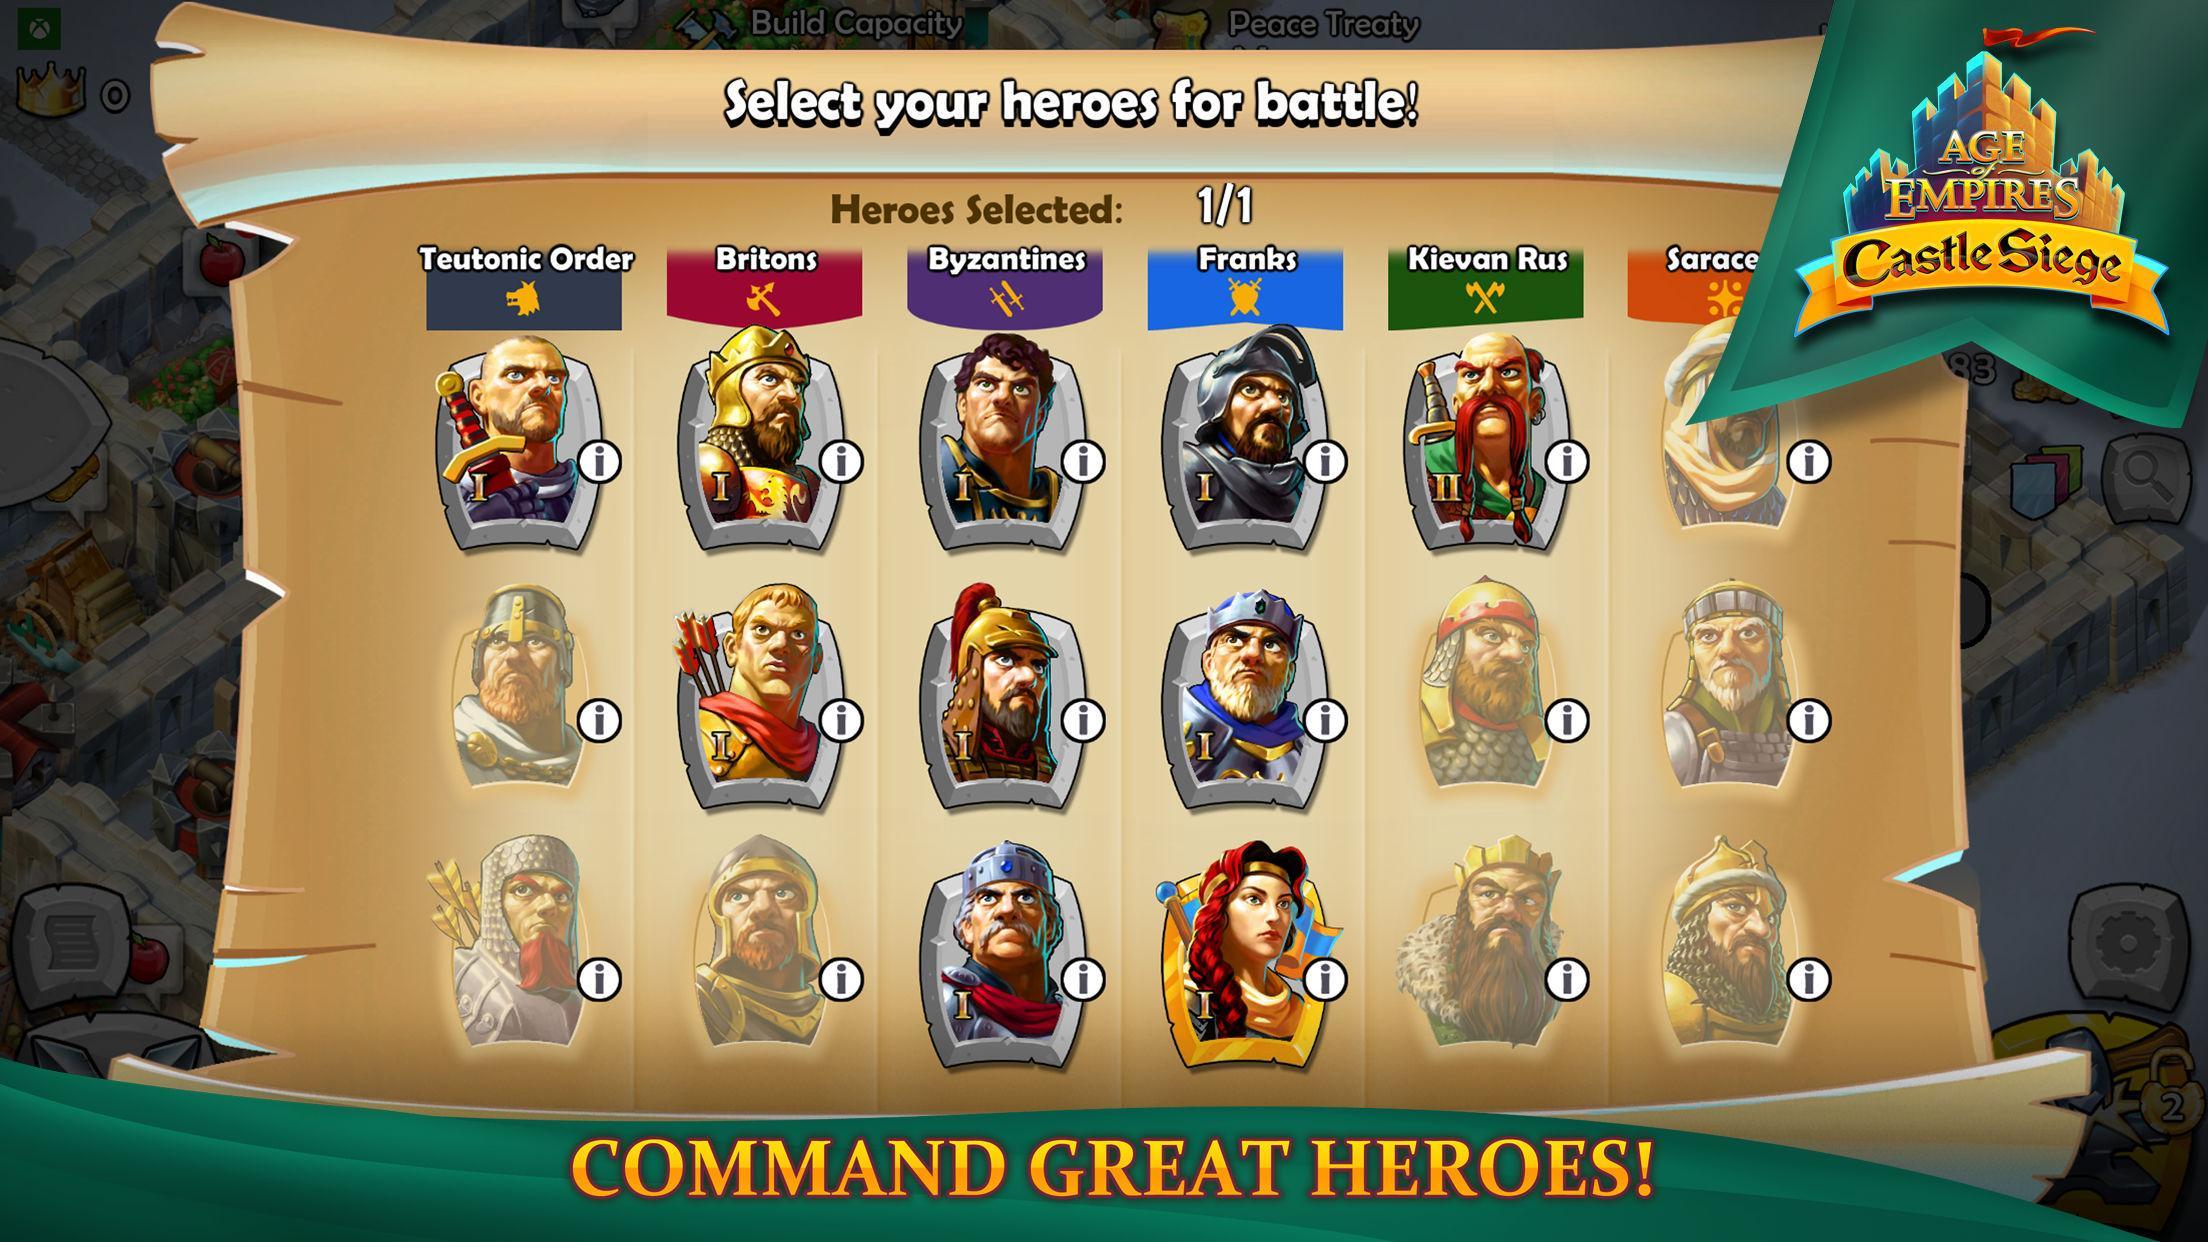 Age of Empires: Castle Siege screenshot game